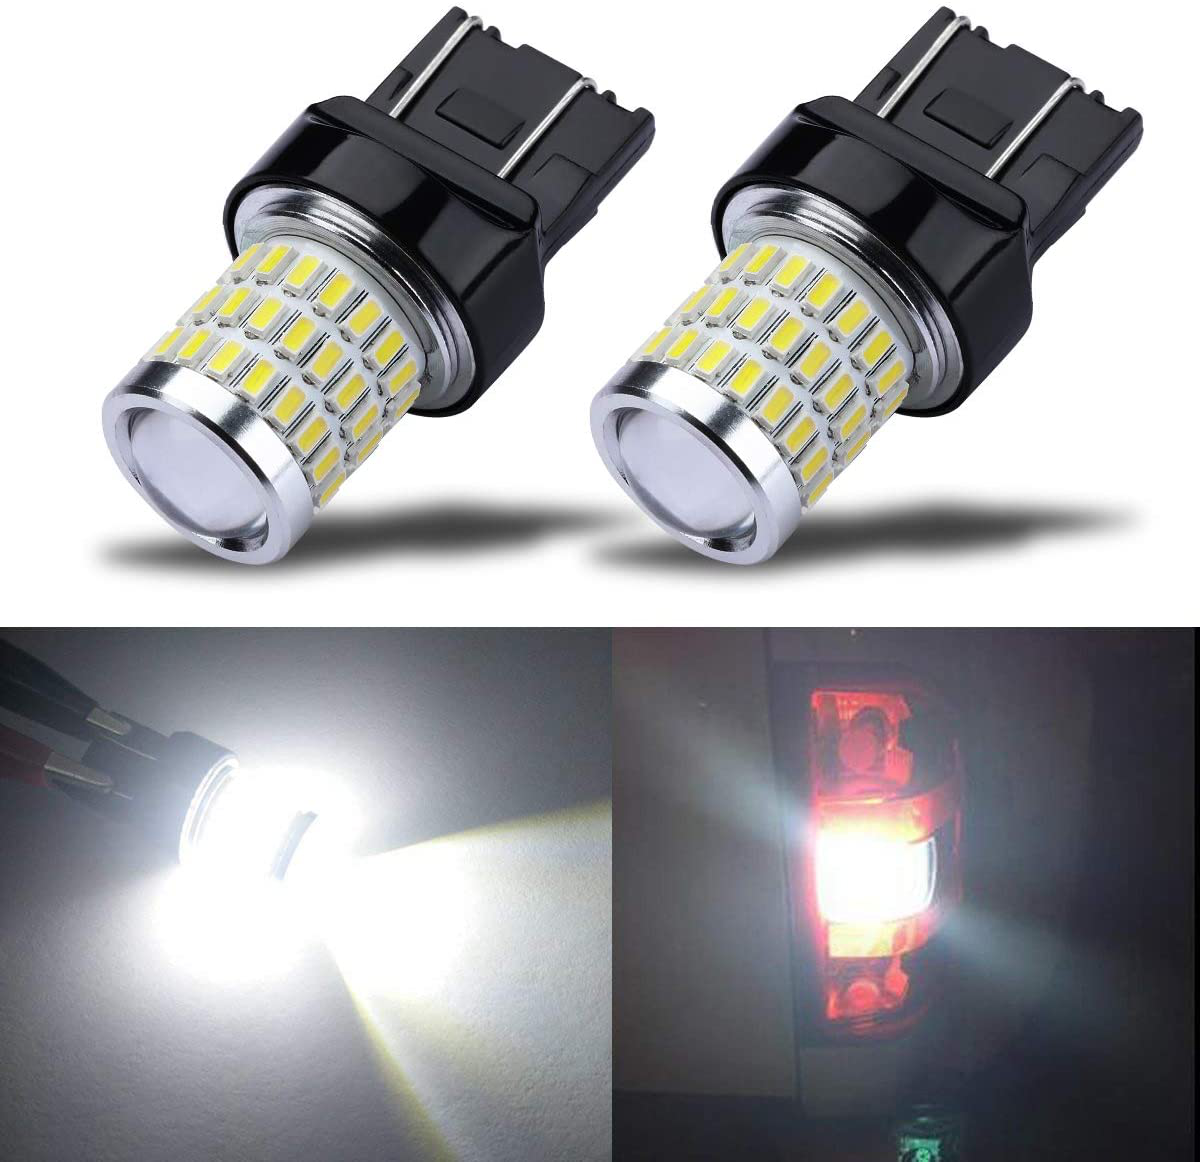 iBrightstar Newest 9-30V Super Bright Low Power 7440 7443 T20 LED Bulbs with Projector replacement for Front Rear Turn Signal Lights